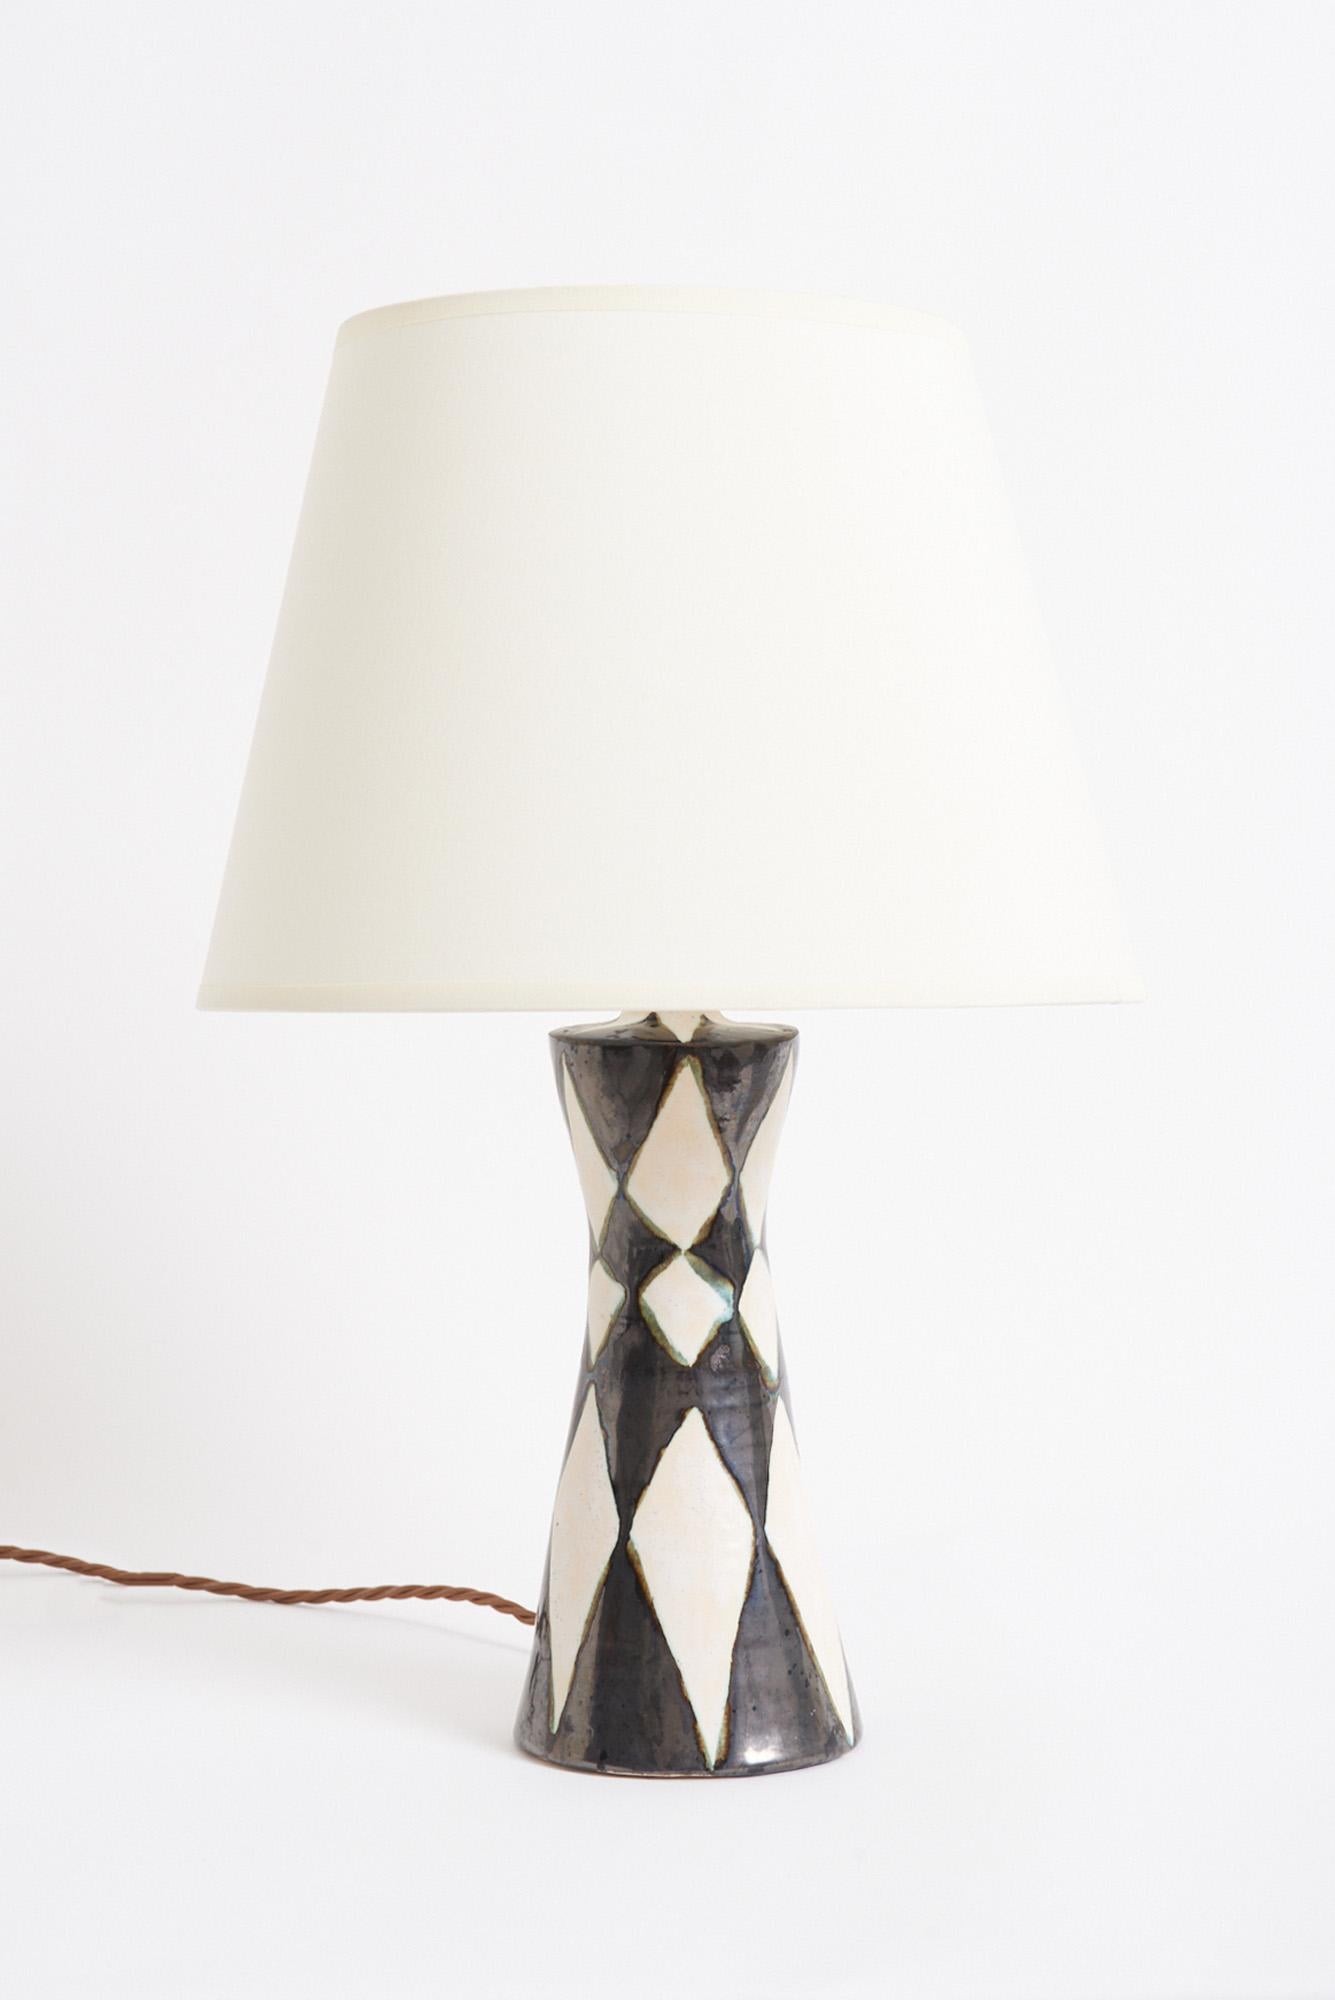 A Harlequin ceramic table lamp
France, mid 20th Century
With the shade: 44.5 cm high by 30.5 cm diameter
Lamp base only: 29 cm high by 9 cm diameter